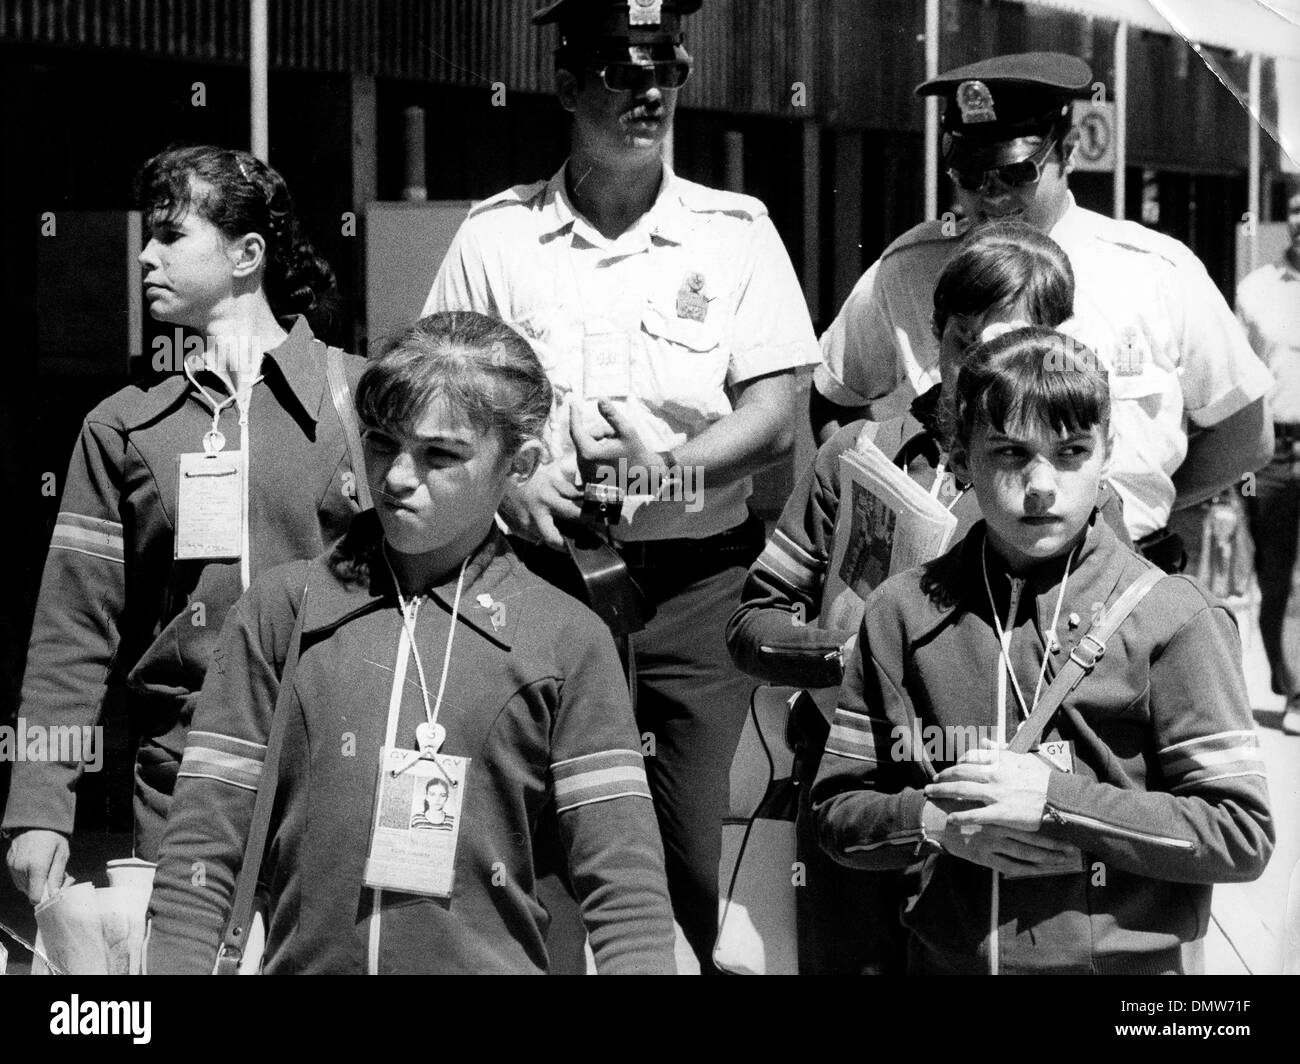 July 26, 1976 - Montreal, Canada - Gymnast NADIA COMANECI walks with her teammates and police escorts through the Olympic Village during the Montreal Olympics.   (Credit Image: © KEYSTONE Pictures USA/ZUMAPRESS.com) Stock Photo